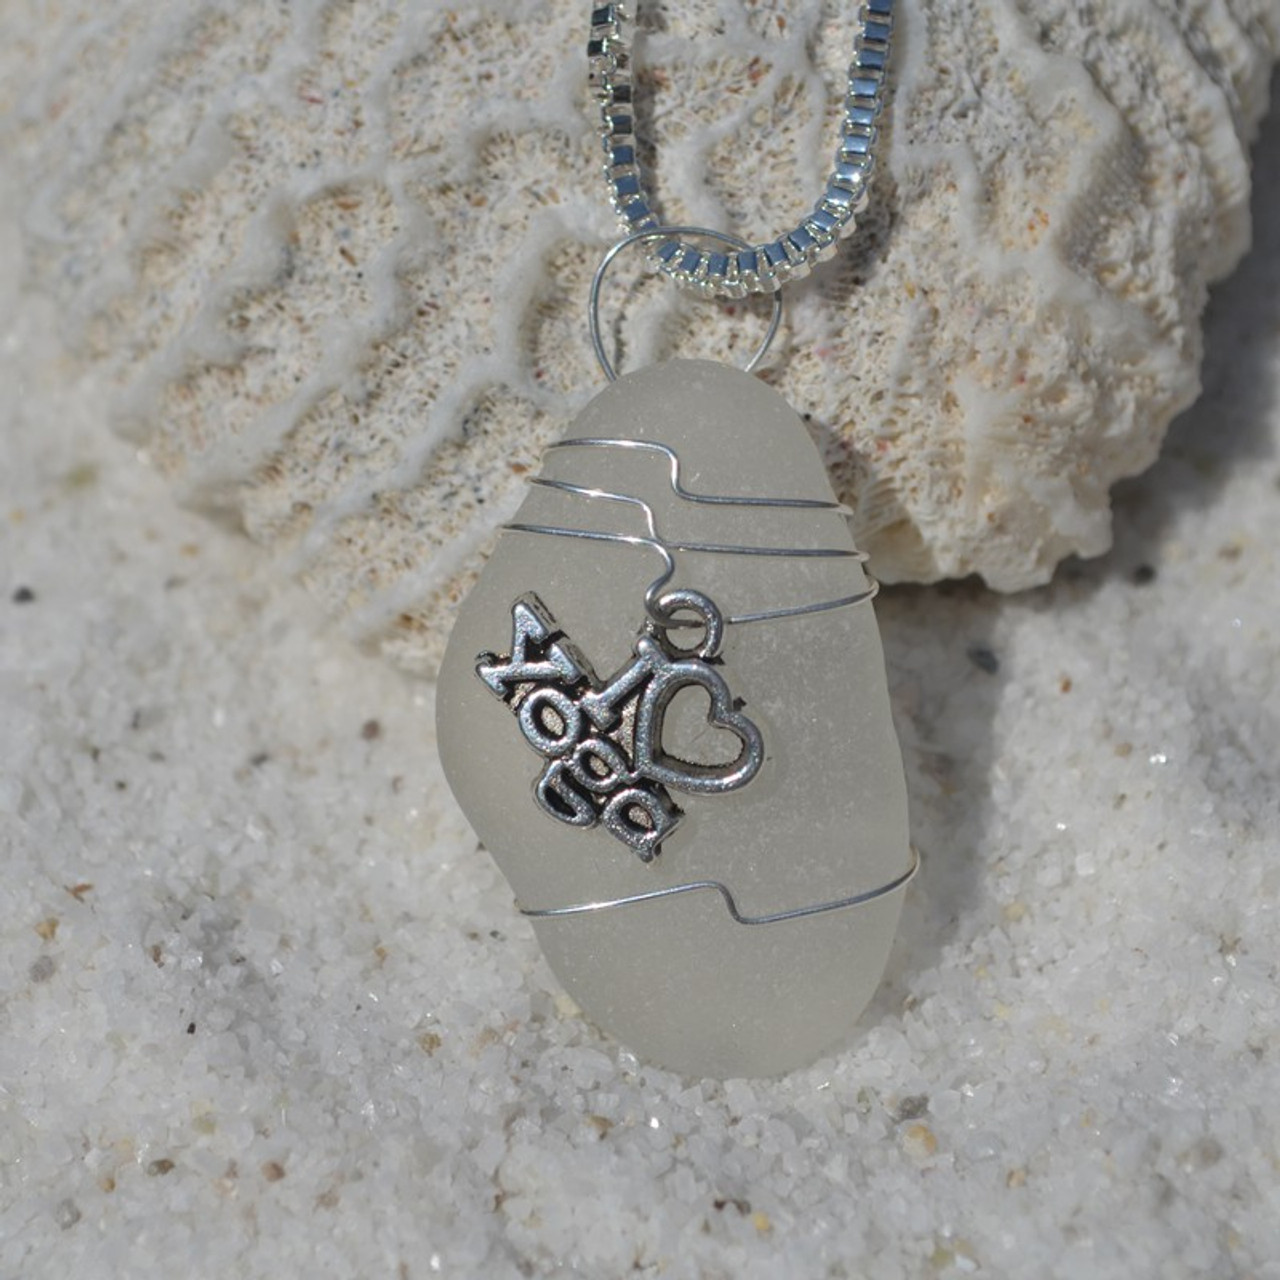 Genuine Sea Glass Necklace with a Silver I Love Yoga Charm - Choose the Color - Frosted, Green, Brown, or Aqua - Made to Order